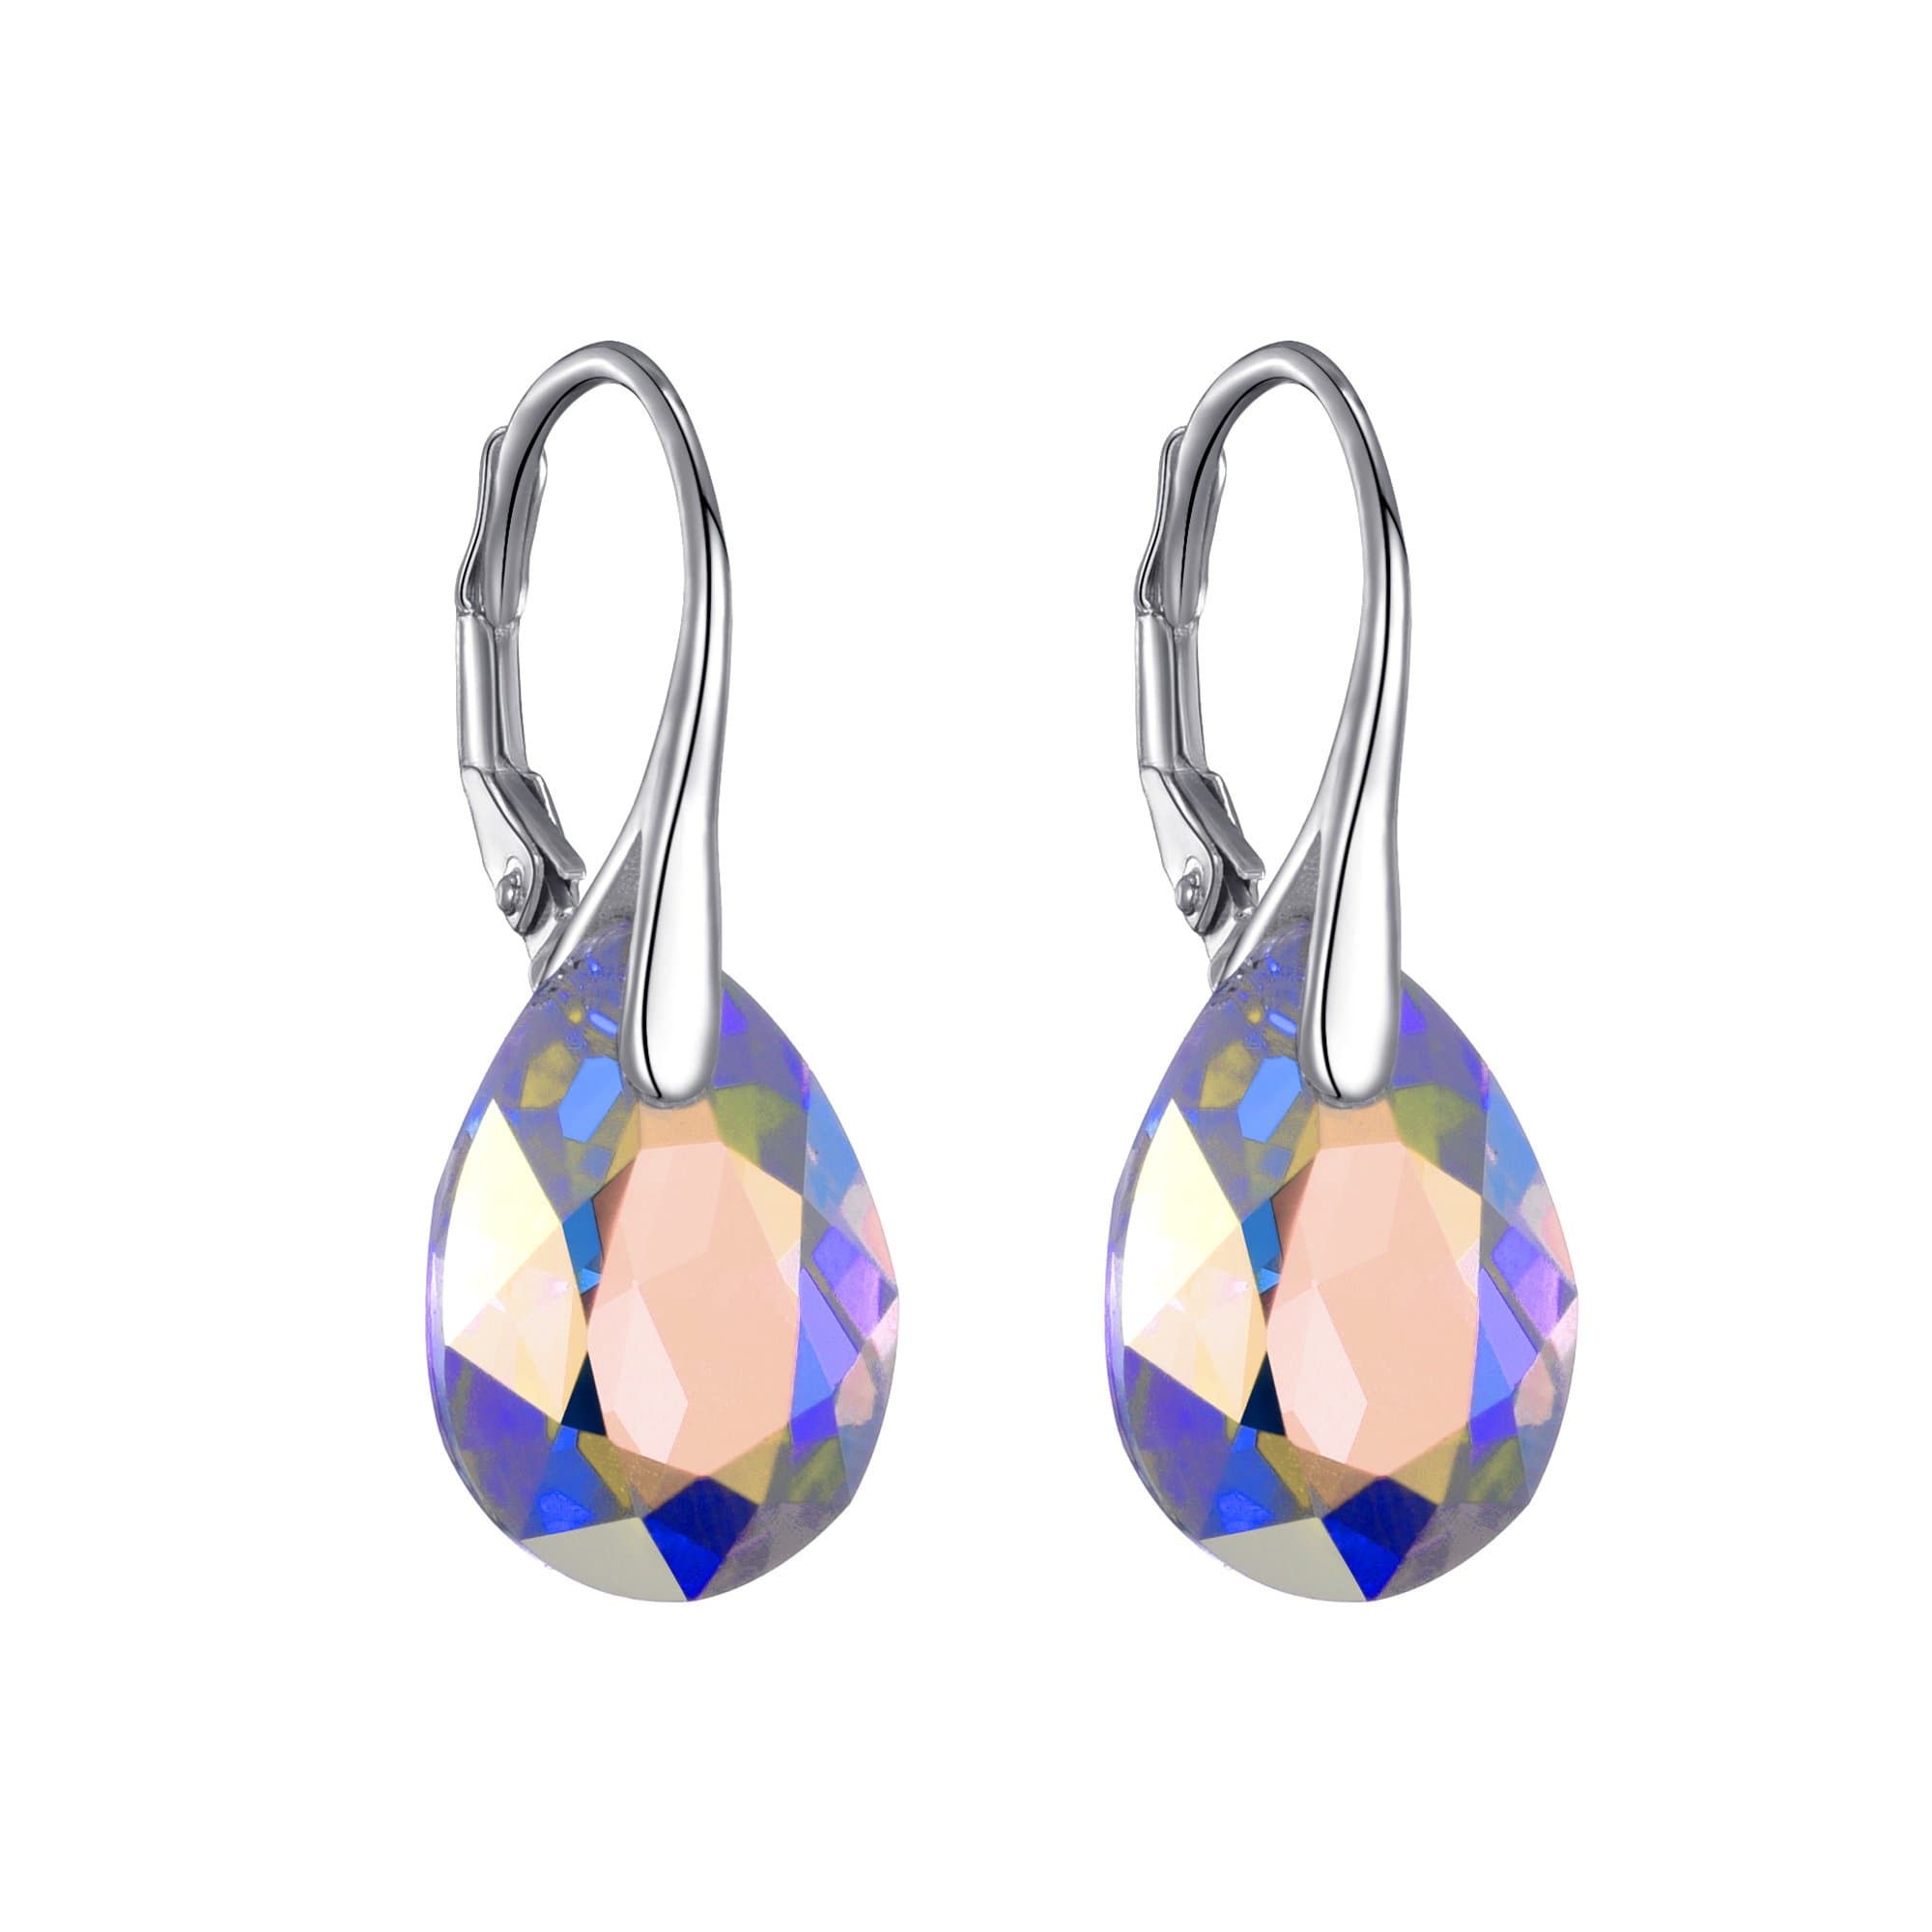 Sterling Silver Aurora Borealis Drop Earrings Created with Zircondia® Crystals by Philip Jones Jewellery